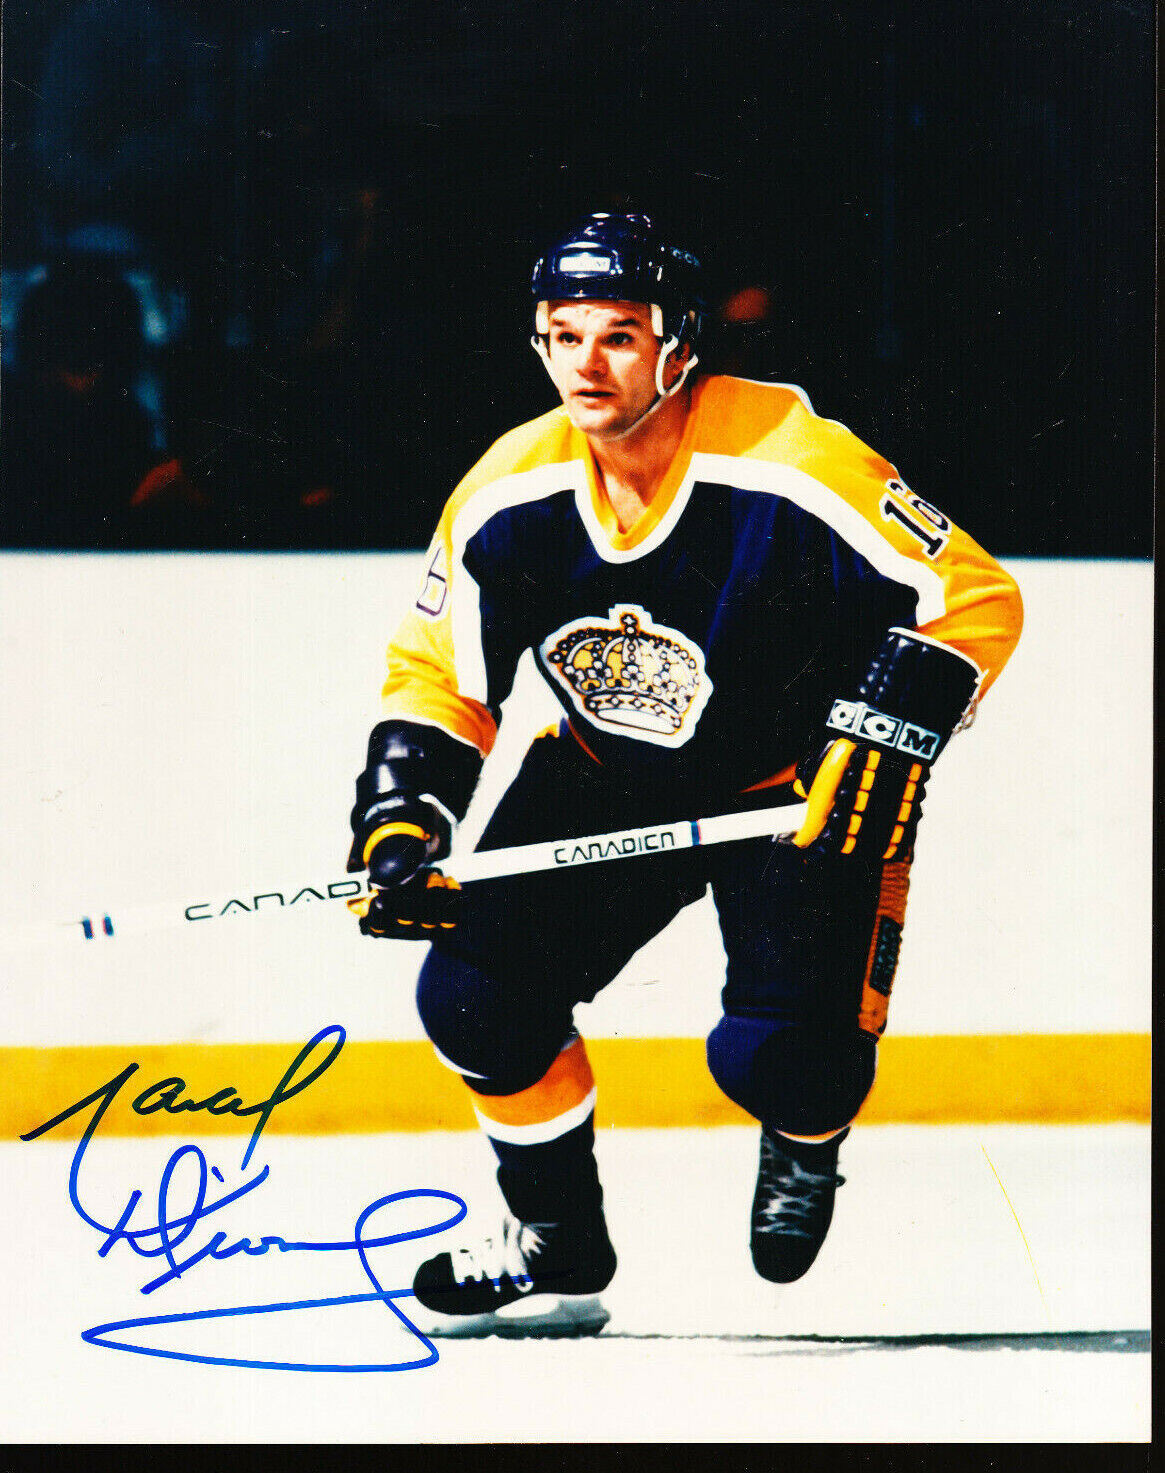 MARCEL DIONNE AUTOGRAPH SIGNED 8X10 Photo Poster painting LOS ANGELES KINGS COA